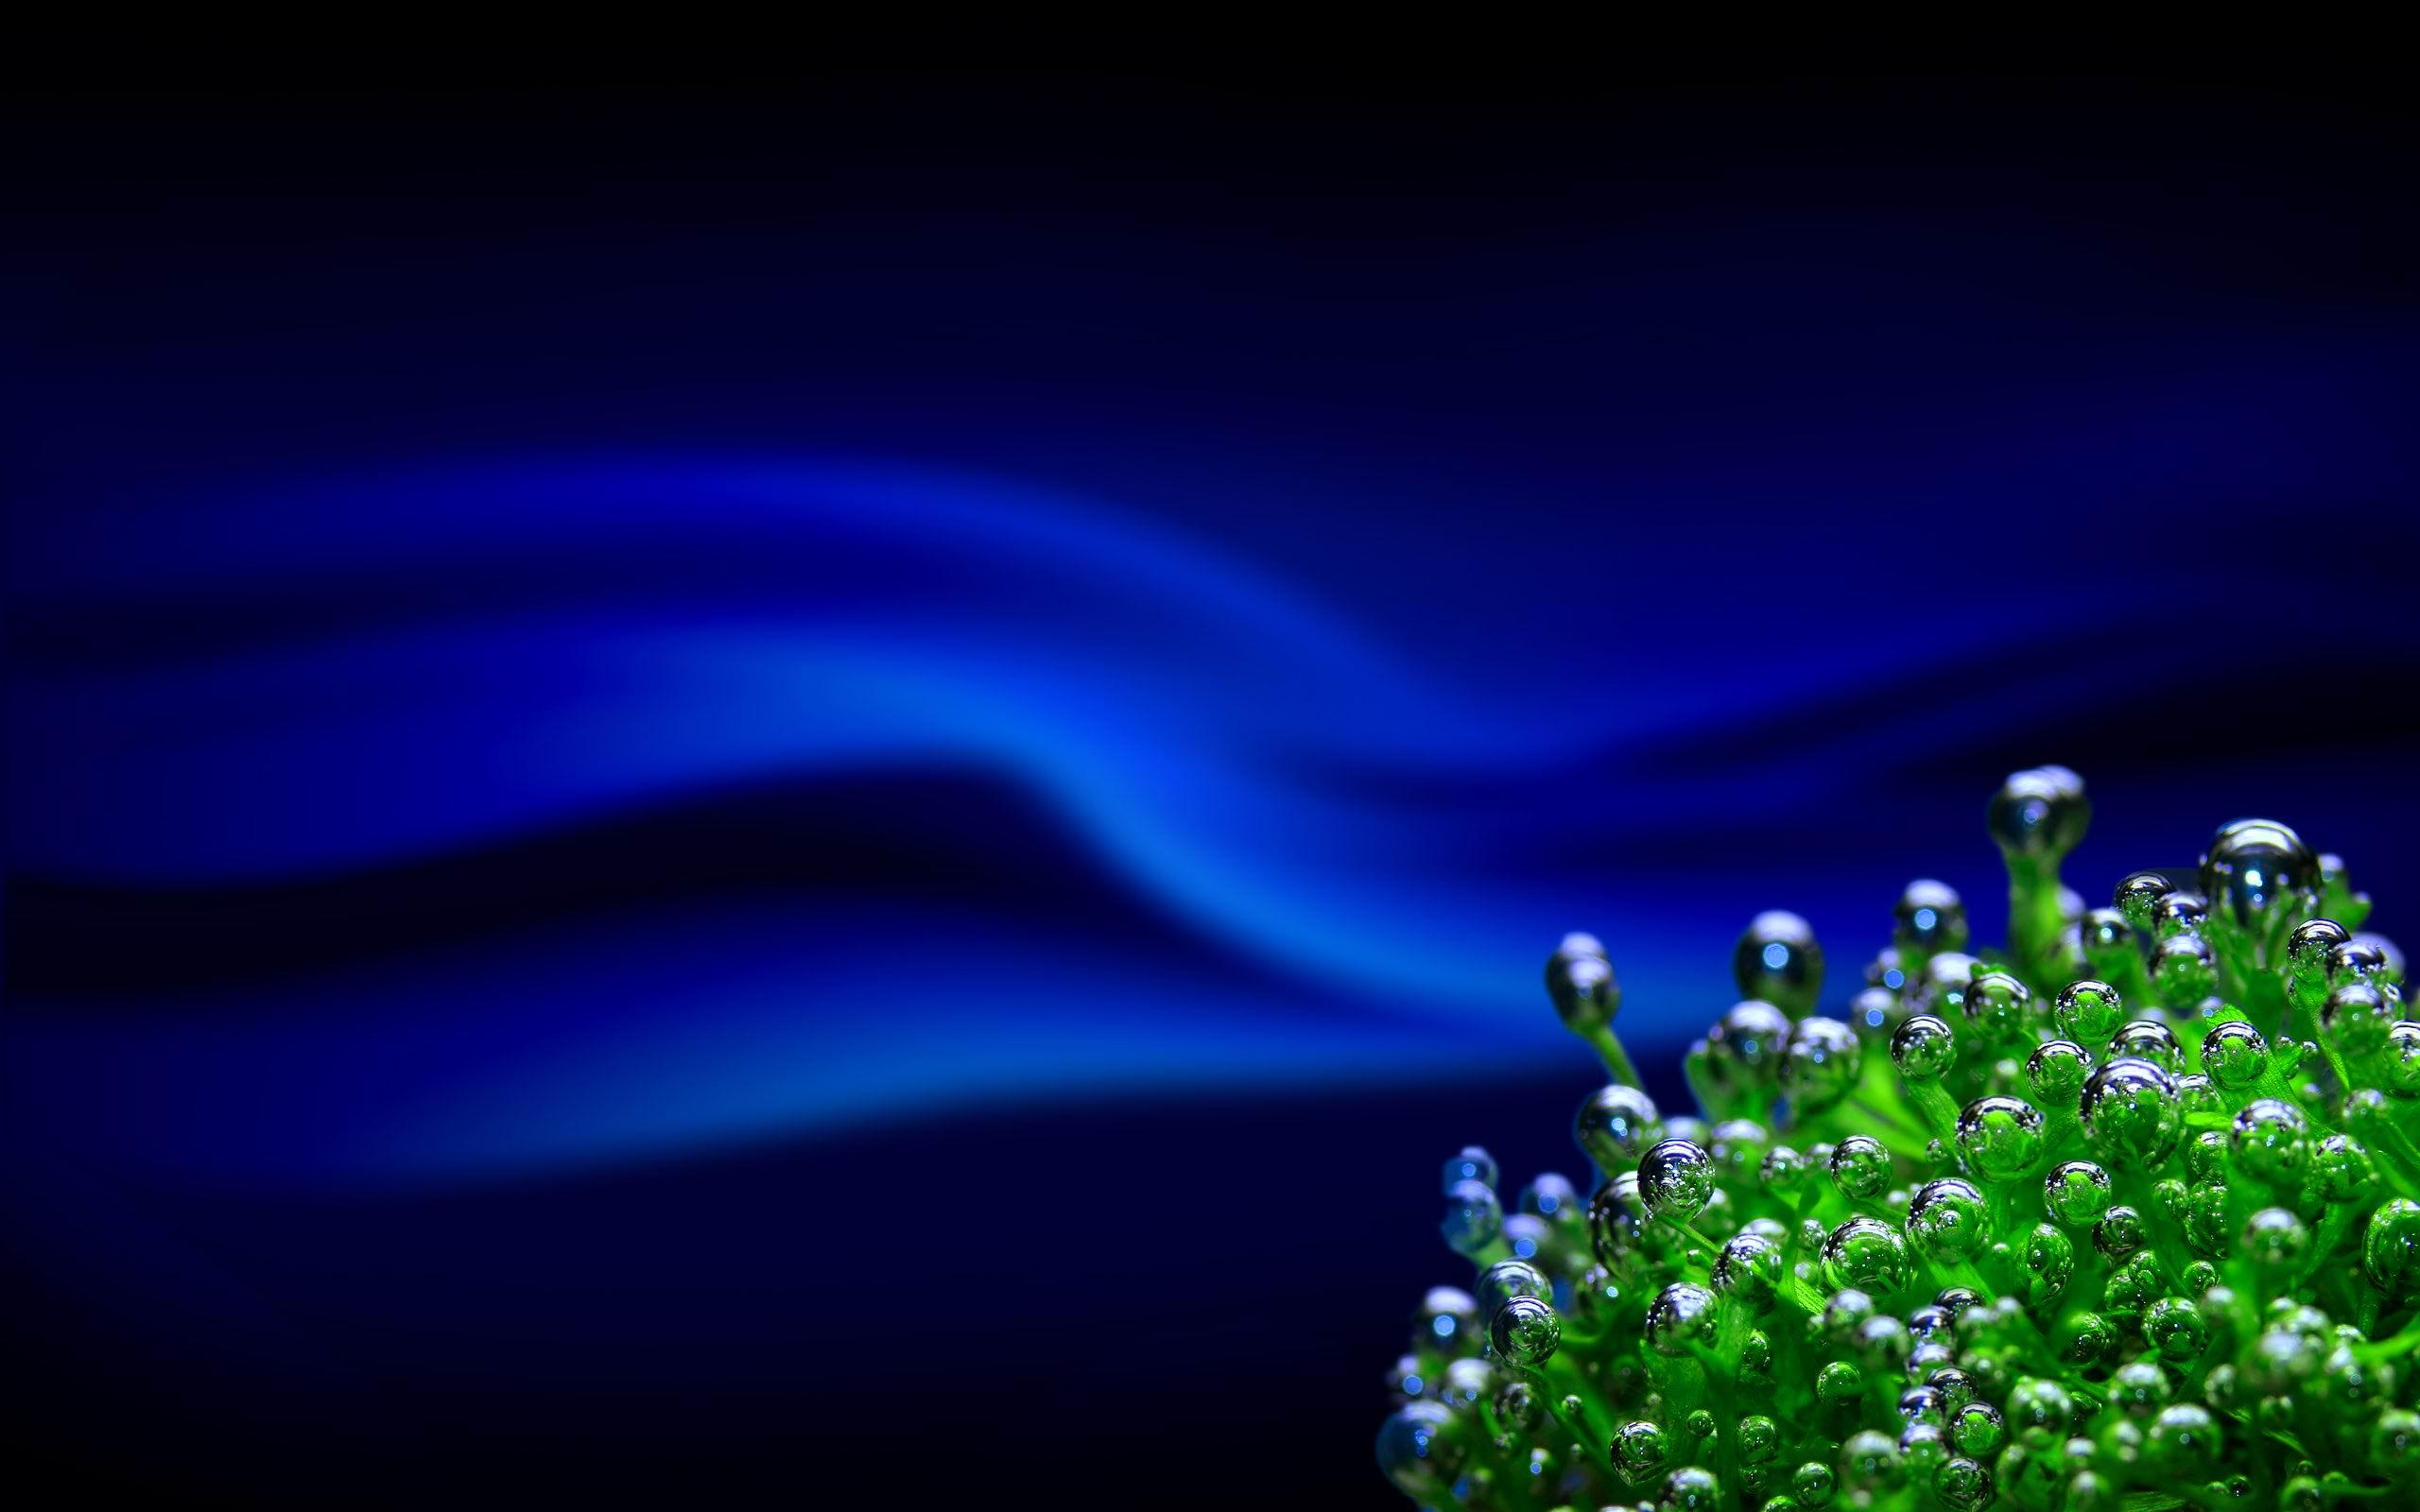 GREEN CORAL opus# 01720 version two july2012 HD Wallpaper